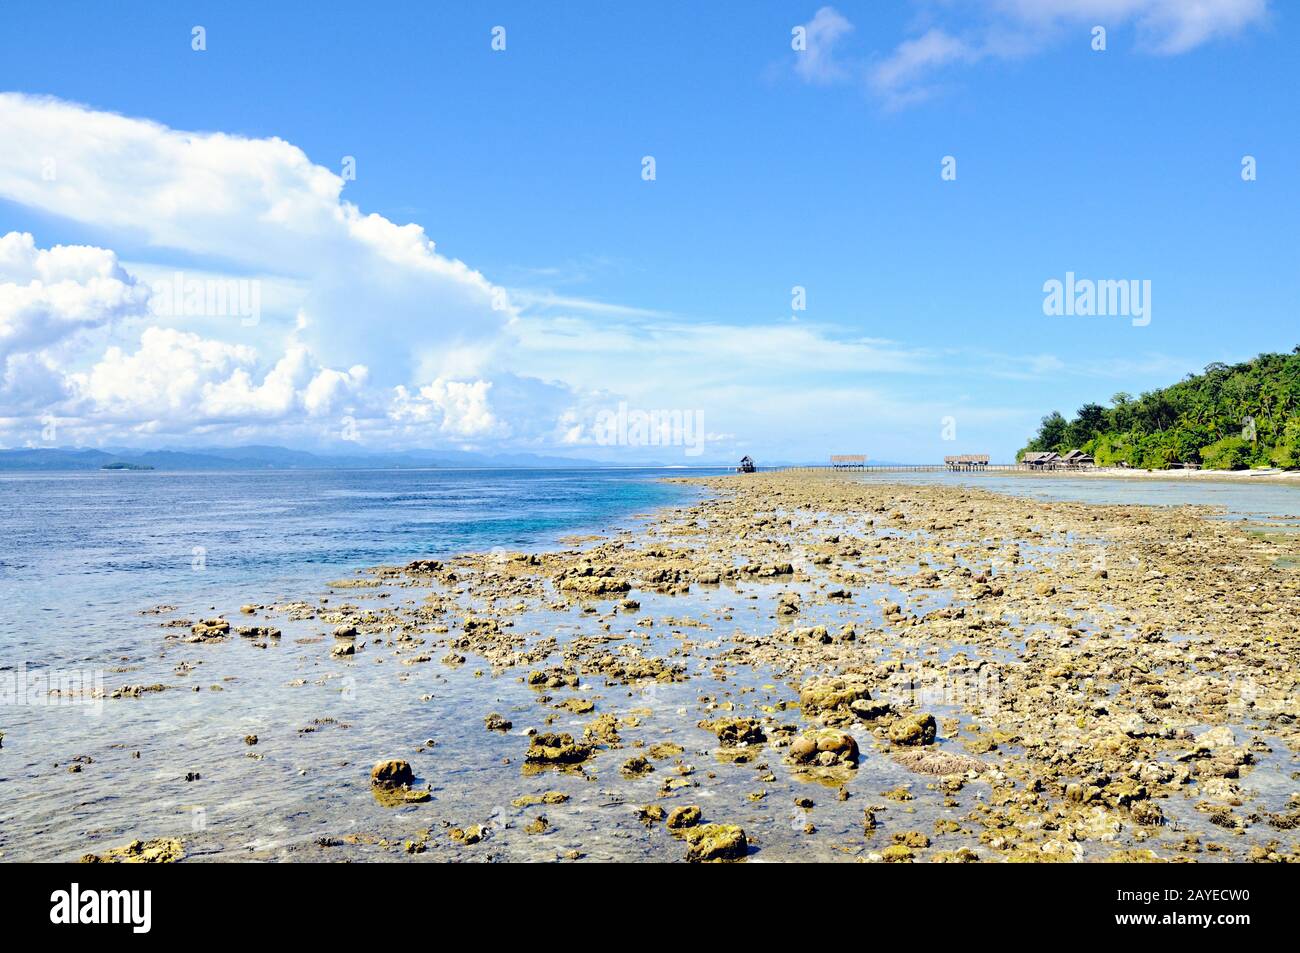 Reef at low tide on the island of Kri Raja Ampat Indonesia Stock Photo